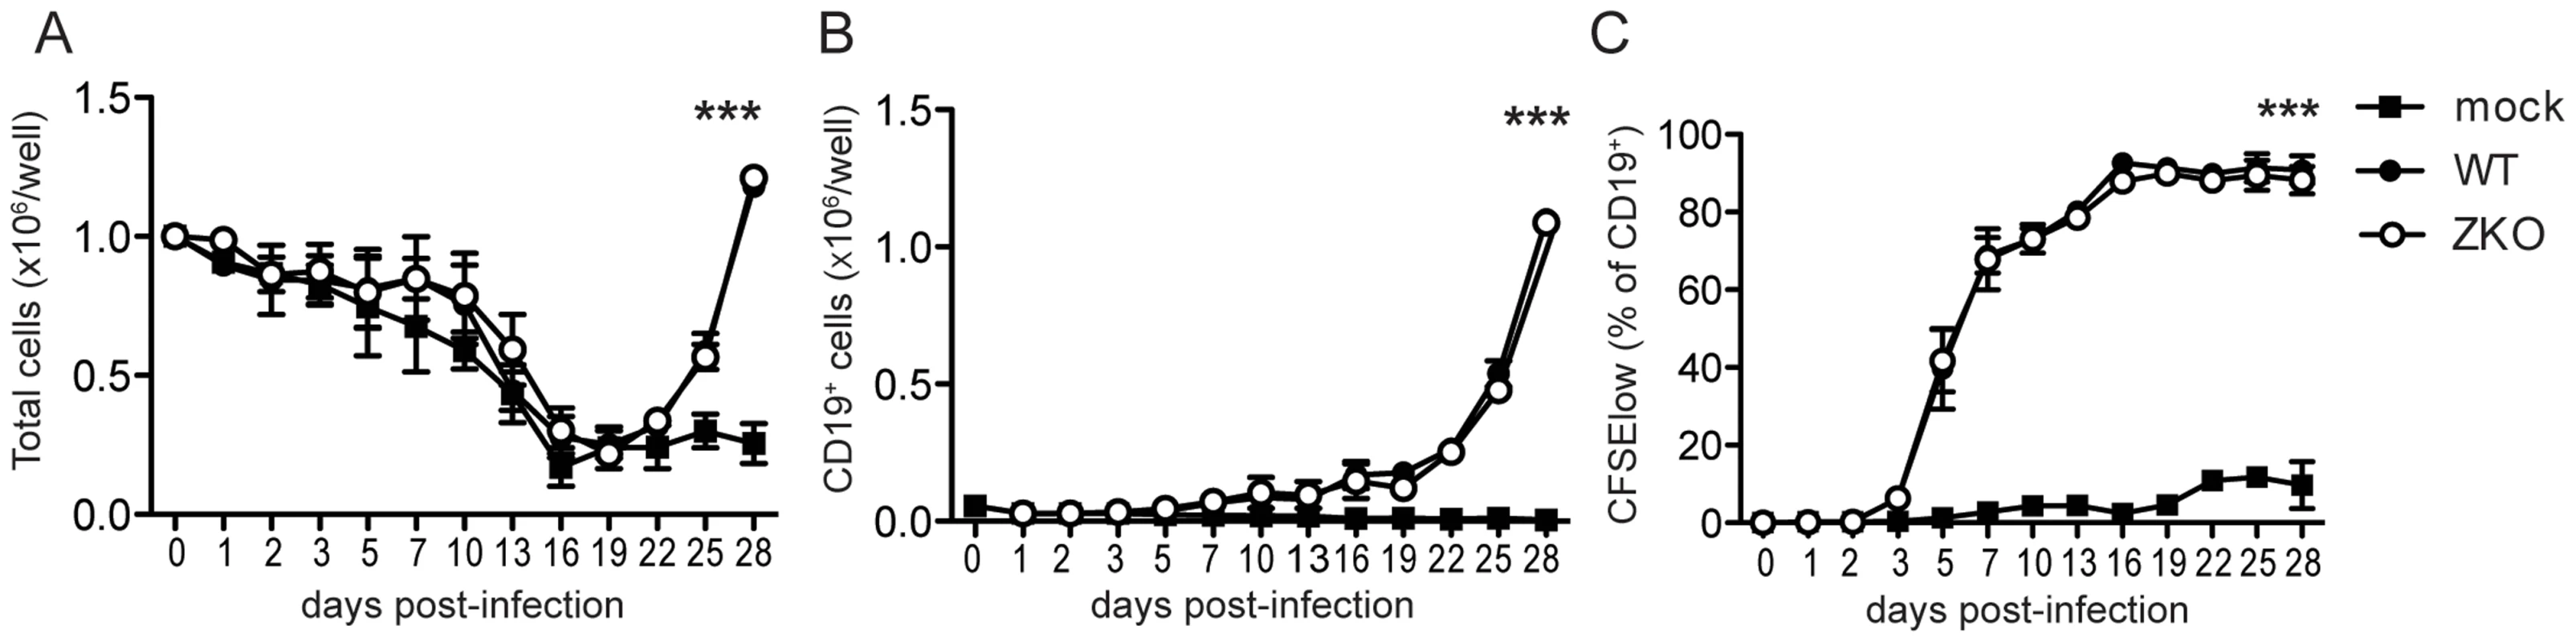 Lytic replication does not significantly contribute to EBV transformation <i>in vitro</i>.